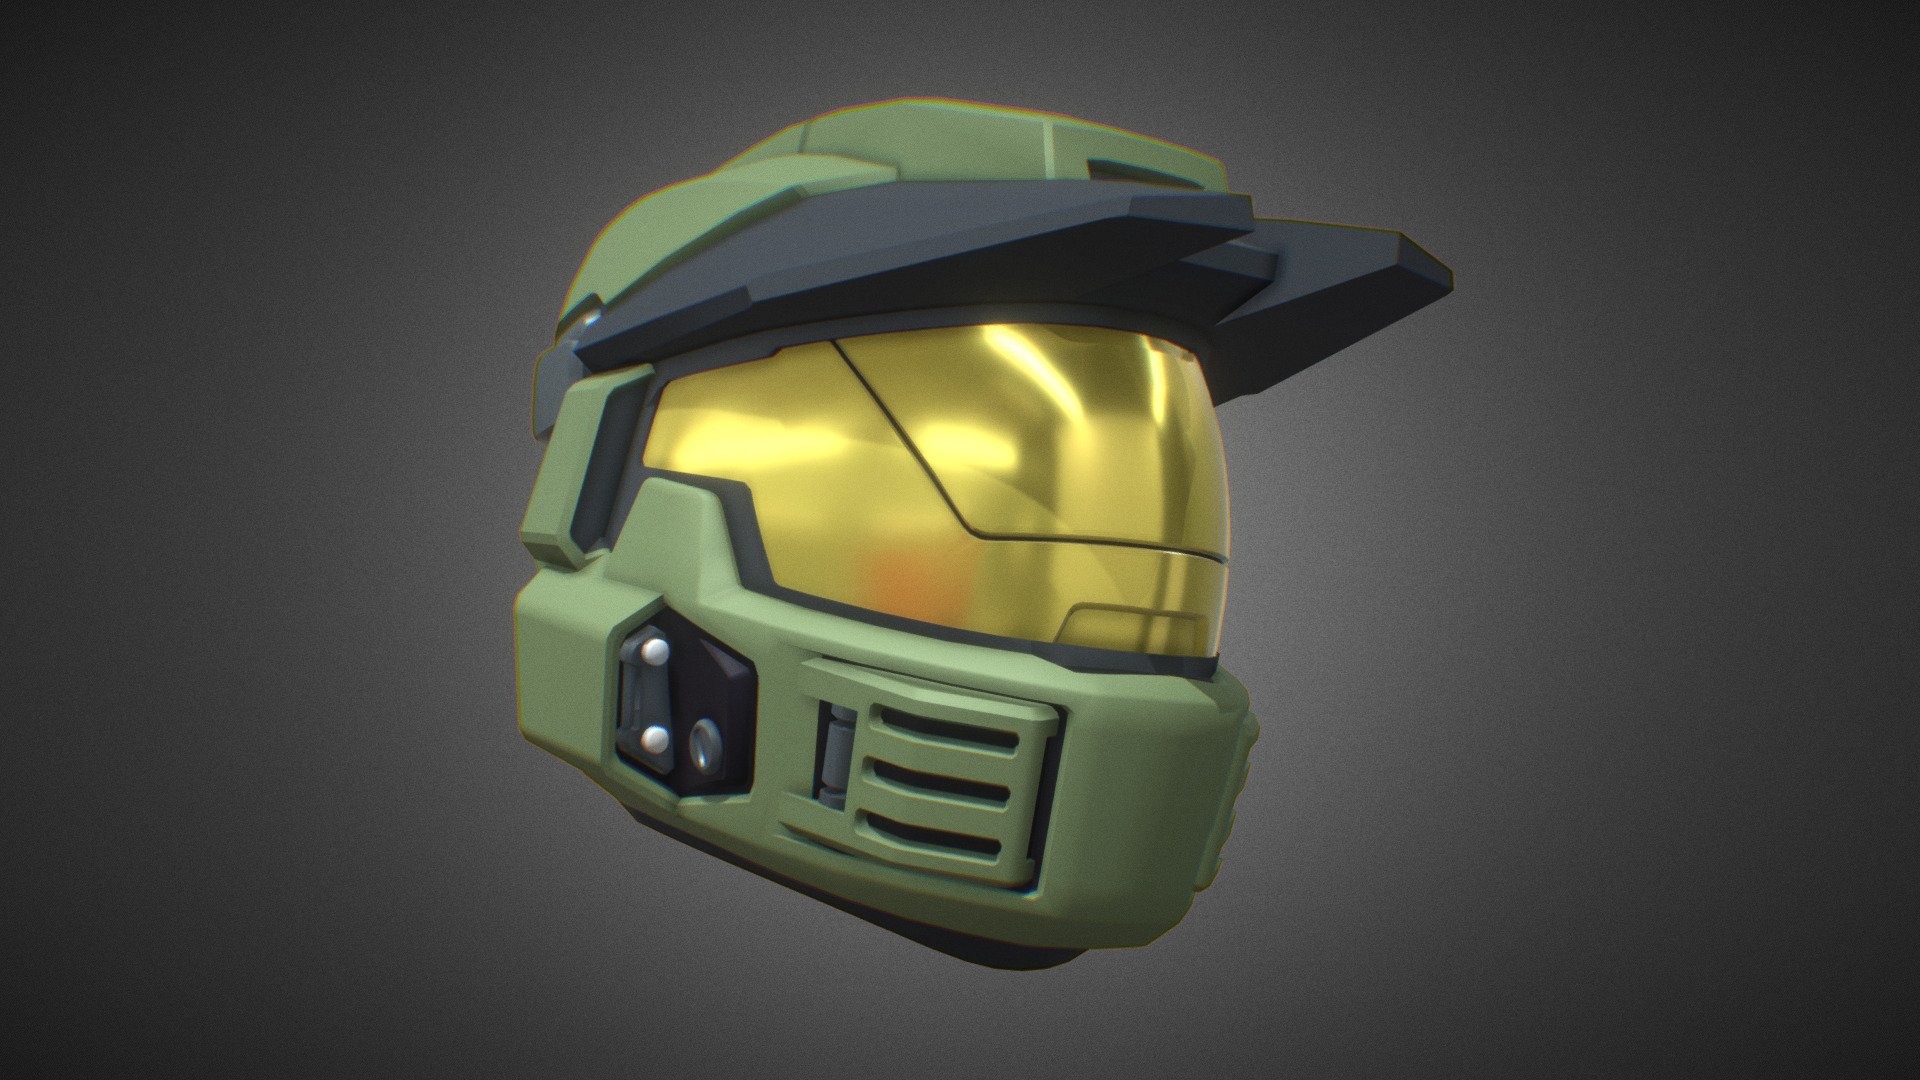 My re-interperetation of the MKV Mjolnir armor system helmet from the Halo franchise. Based on a mix of concept art, various in-game version and a few personal touches.

Tips and donations are welcome! (I do this in what free-time I have T-T ) send to: paypal.me/holiestmallard

Halo Combat evolved, (as well as its sequels and spin-offs) as related to the source material are property of Microsoft and 343 industries. This model is not for resale on other platforms.

I do not consent to the use of this model in training generative AI 3d model